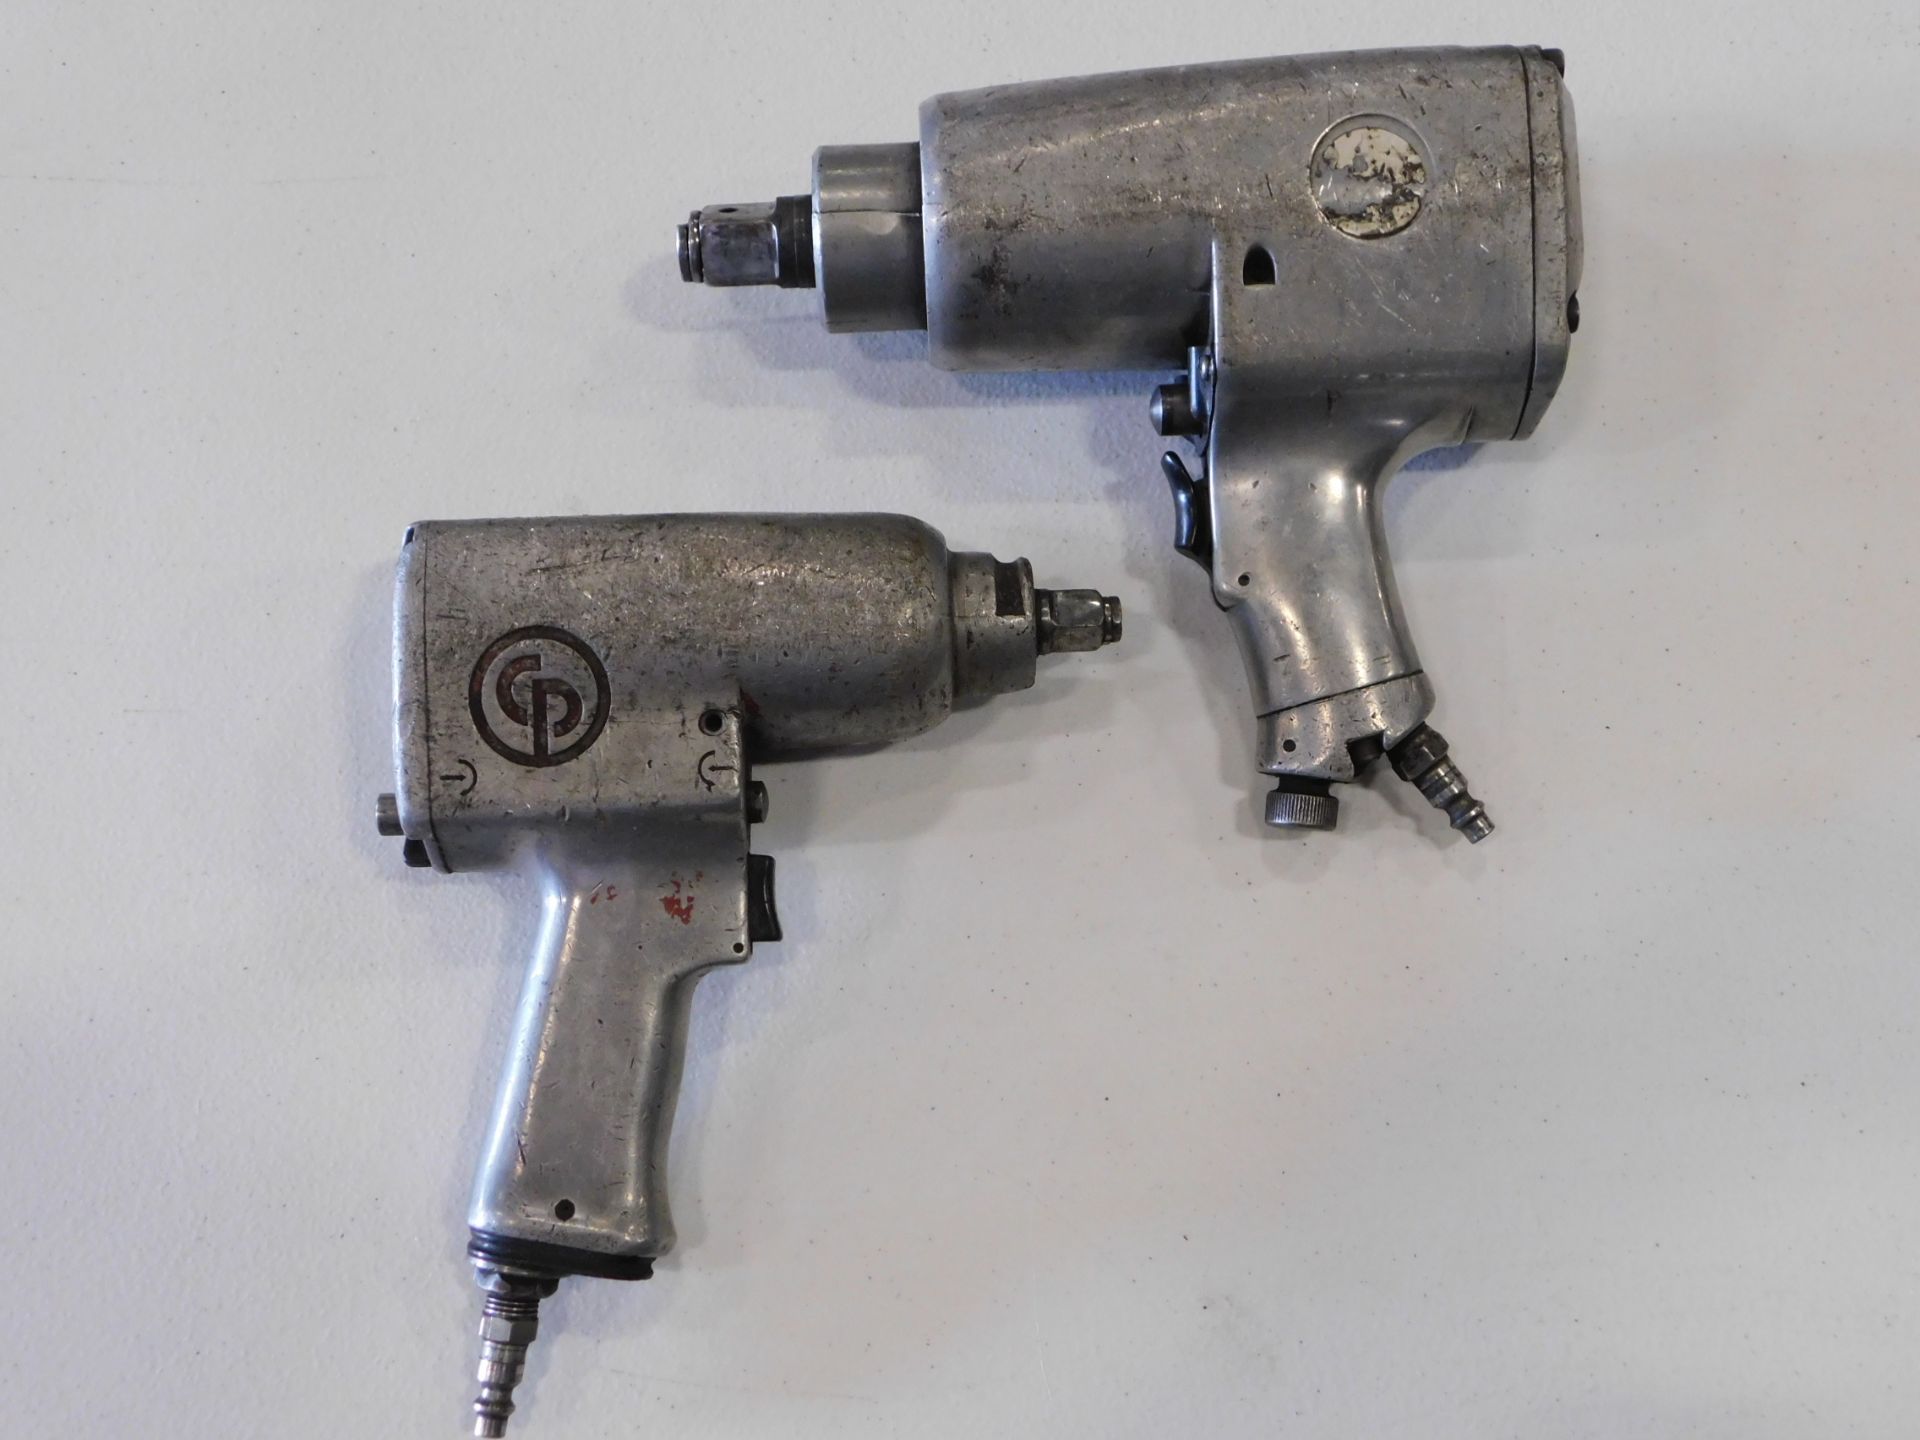 3/4 Inch Drive Pneumatic Impact and Chicago 1/2 Inch Drive Pneumatic Impact